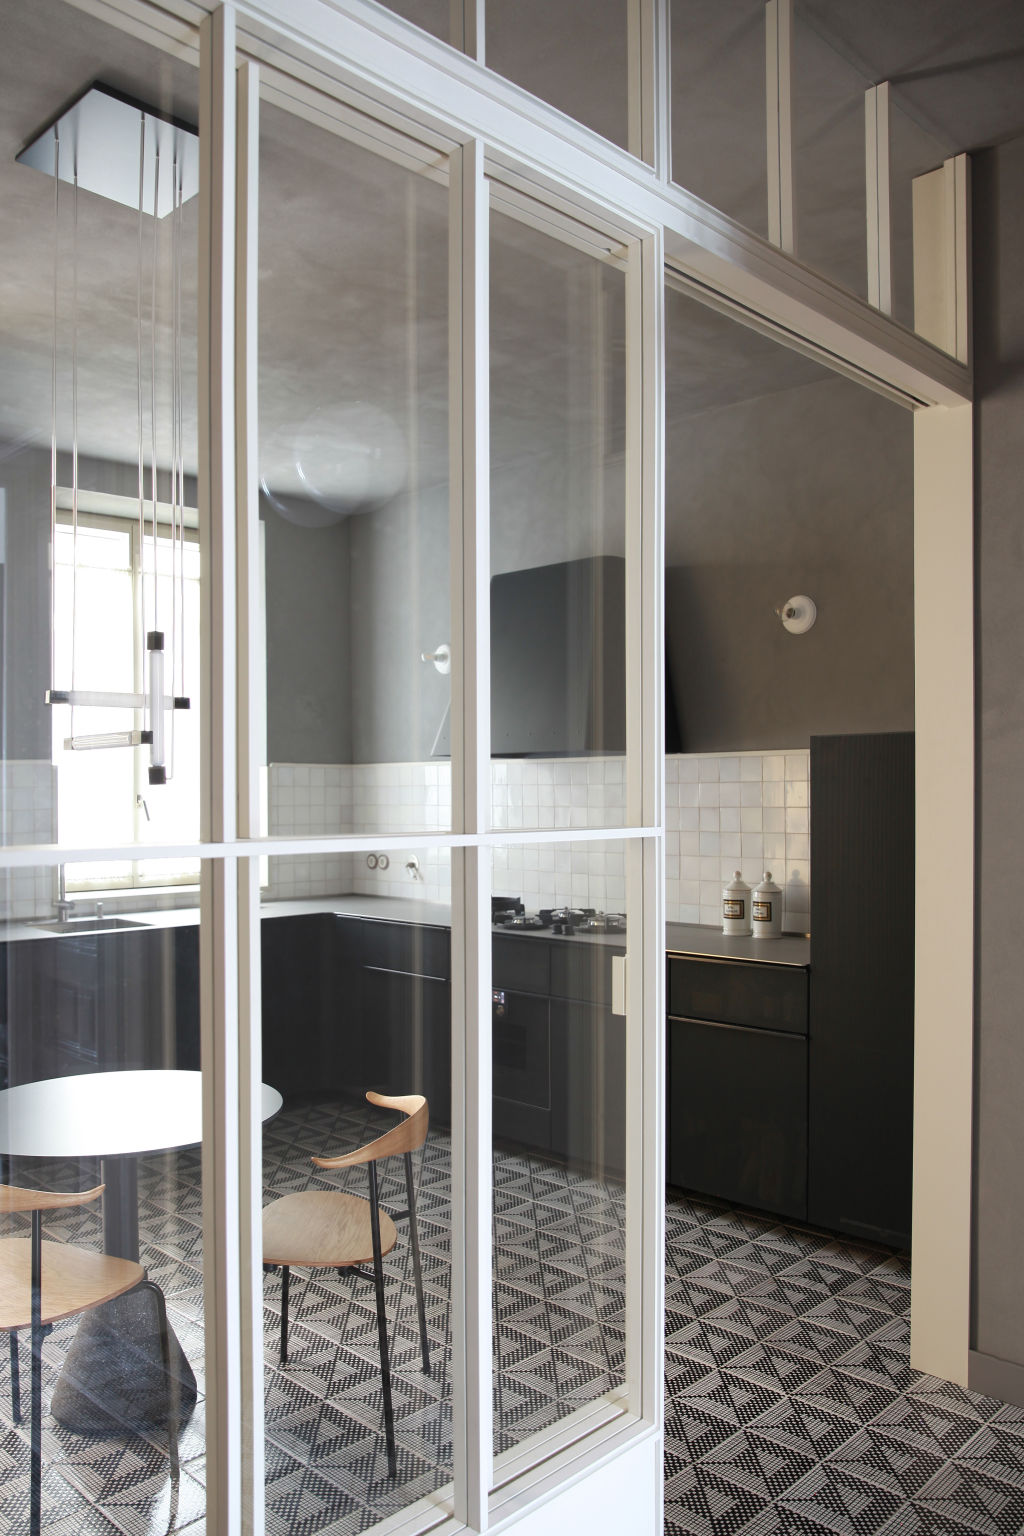 The living and kitchen spaces feature sober, monochromatic colours. Photo: Carola Ripamonti